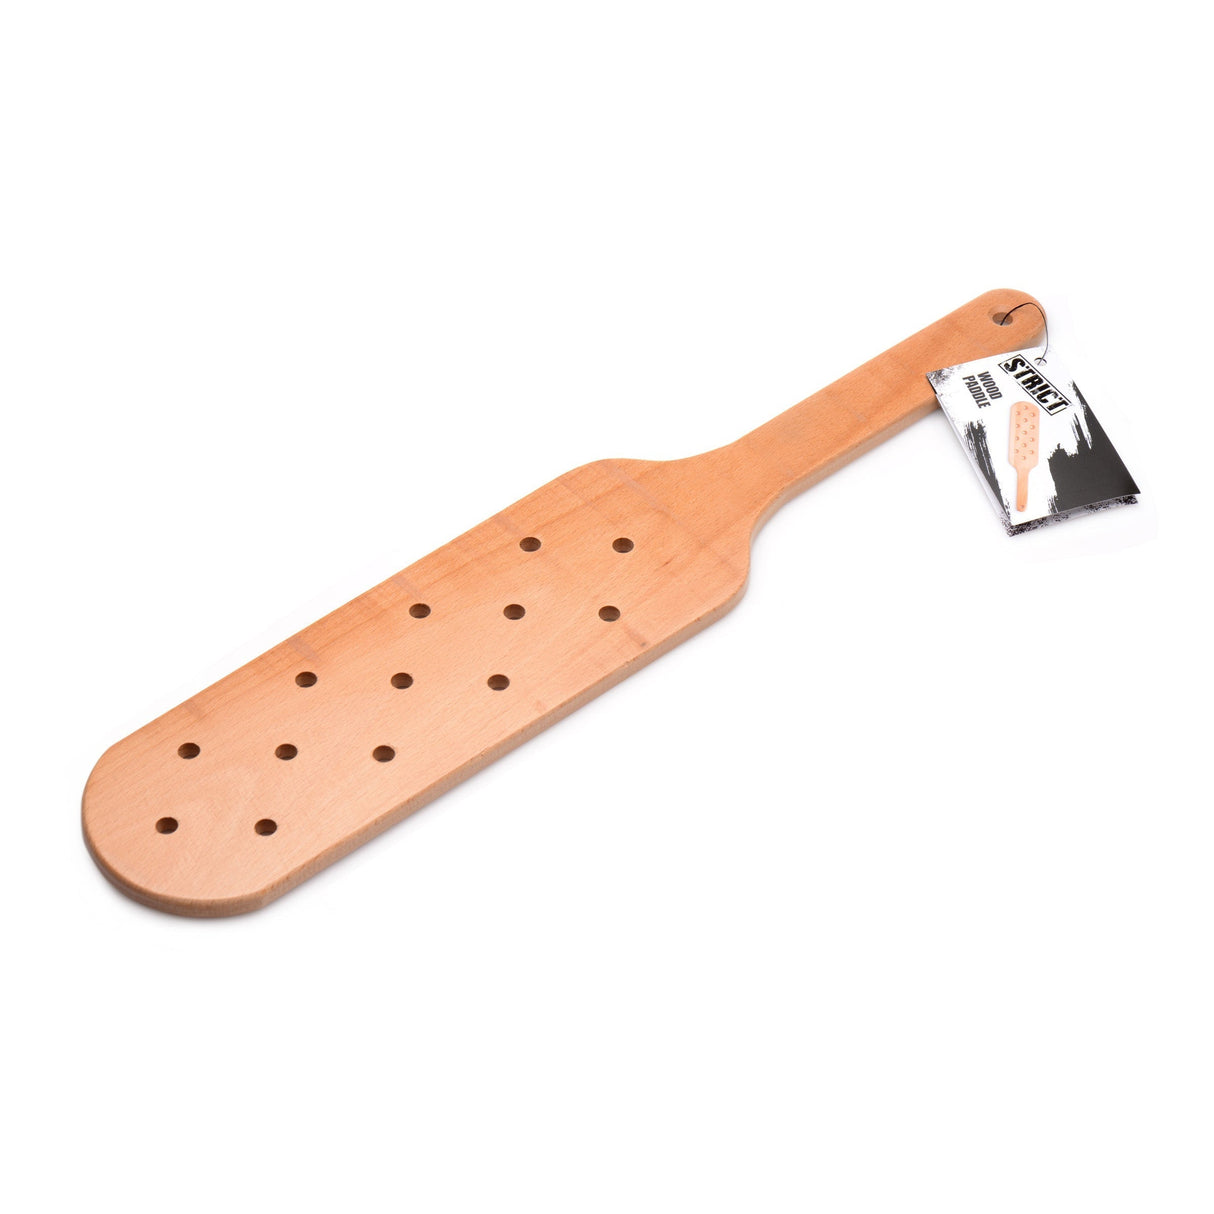 STRICT Wooden Paddle